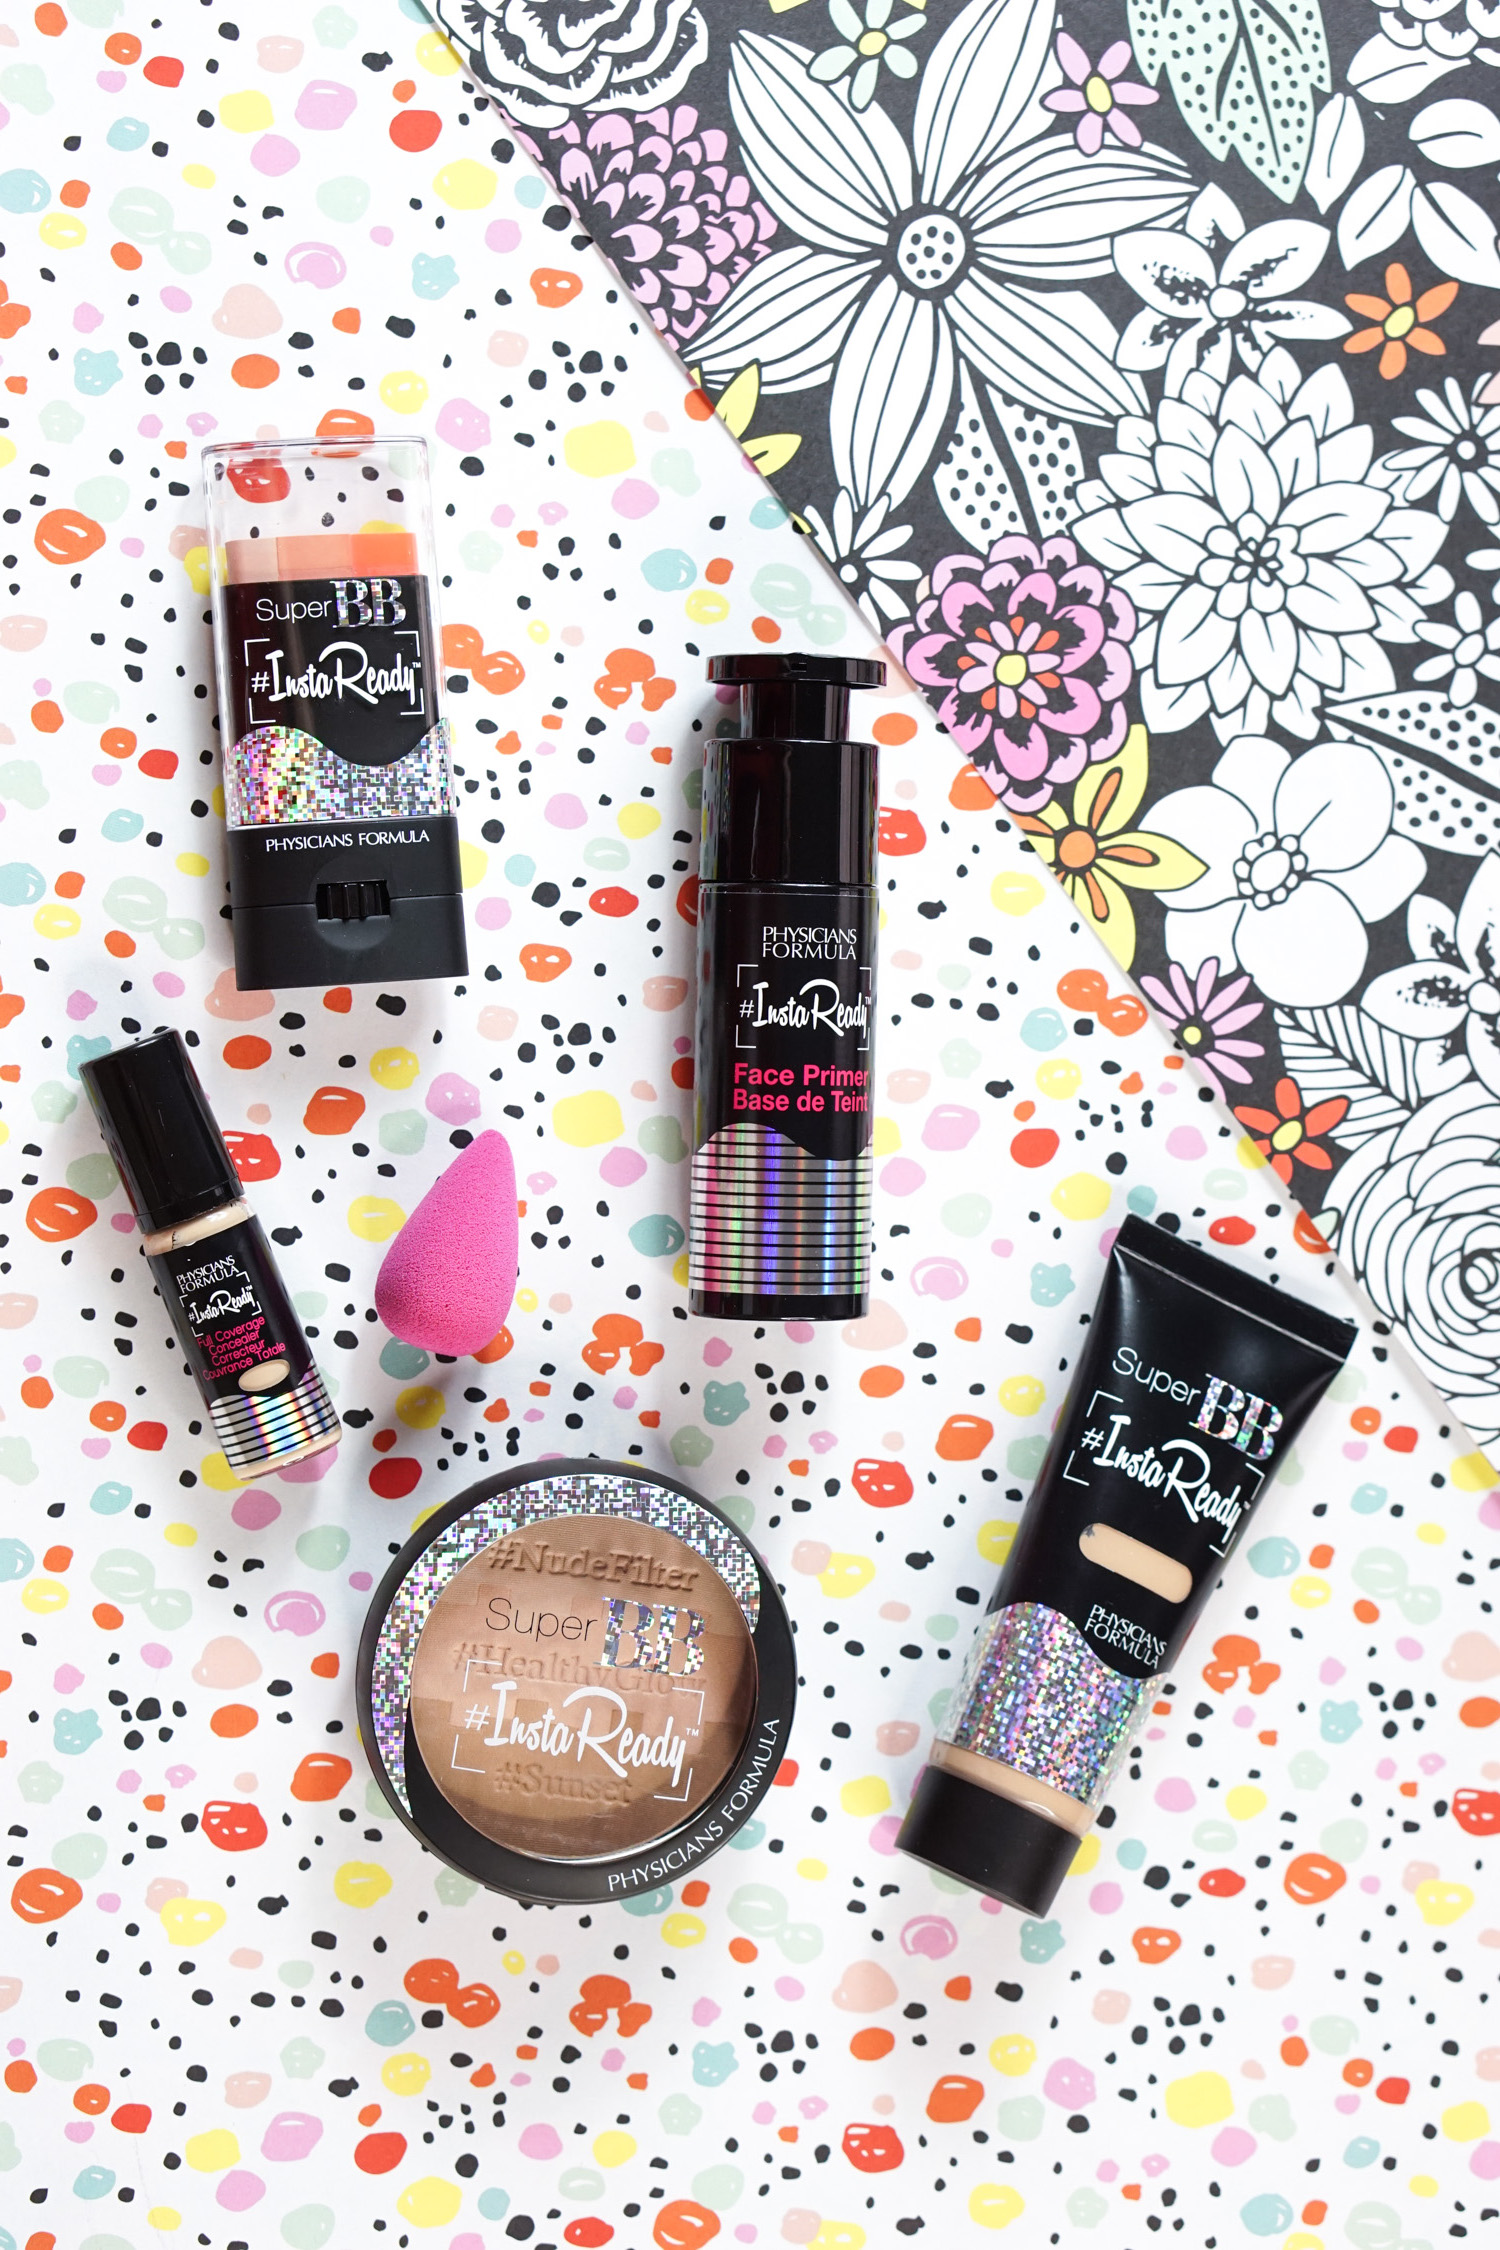 Physicians Formula #InstaReady Line Review - Style Sprinter